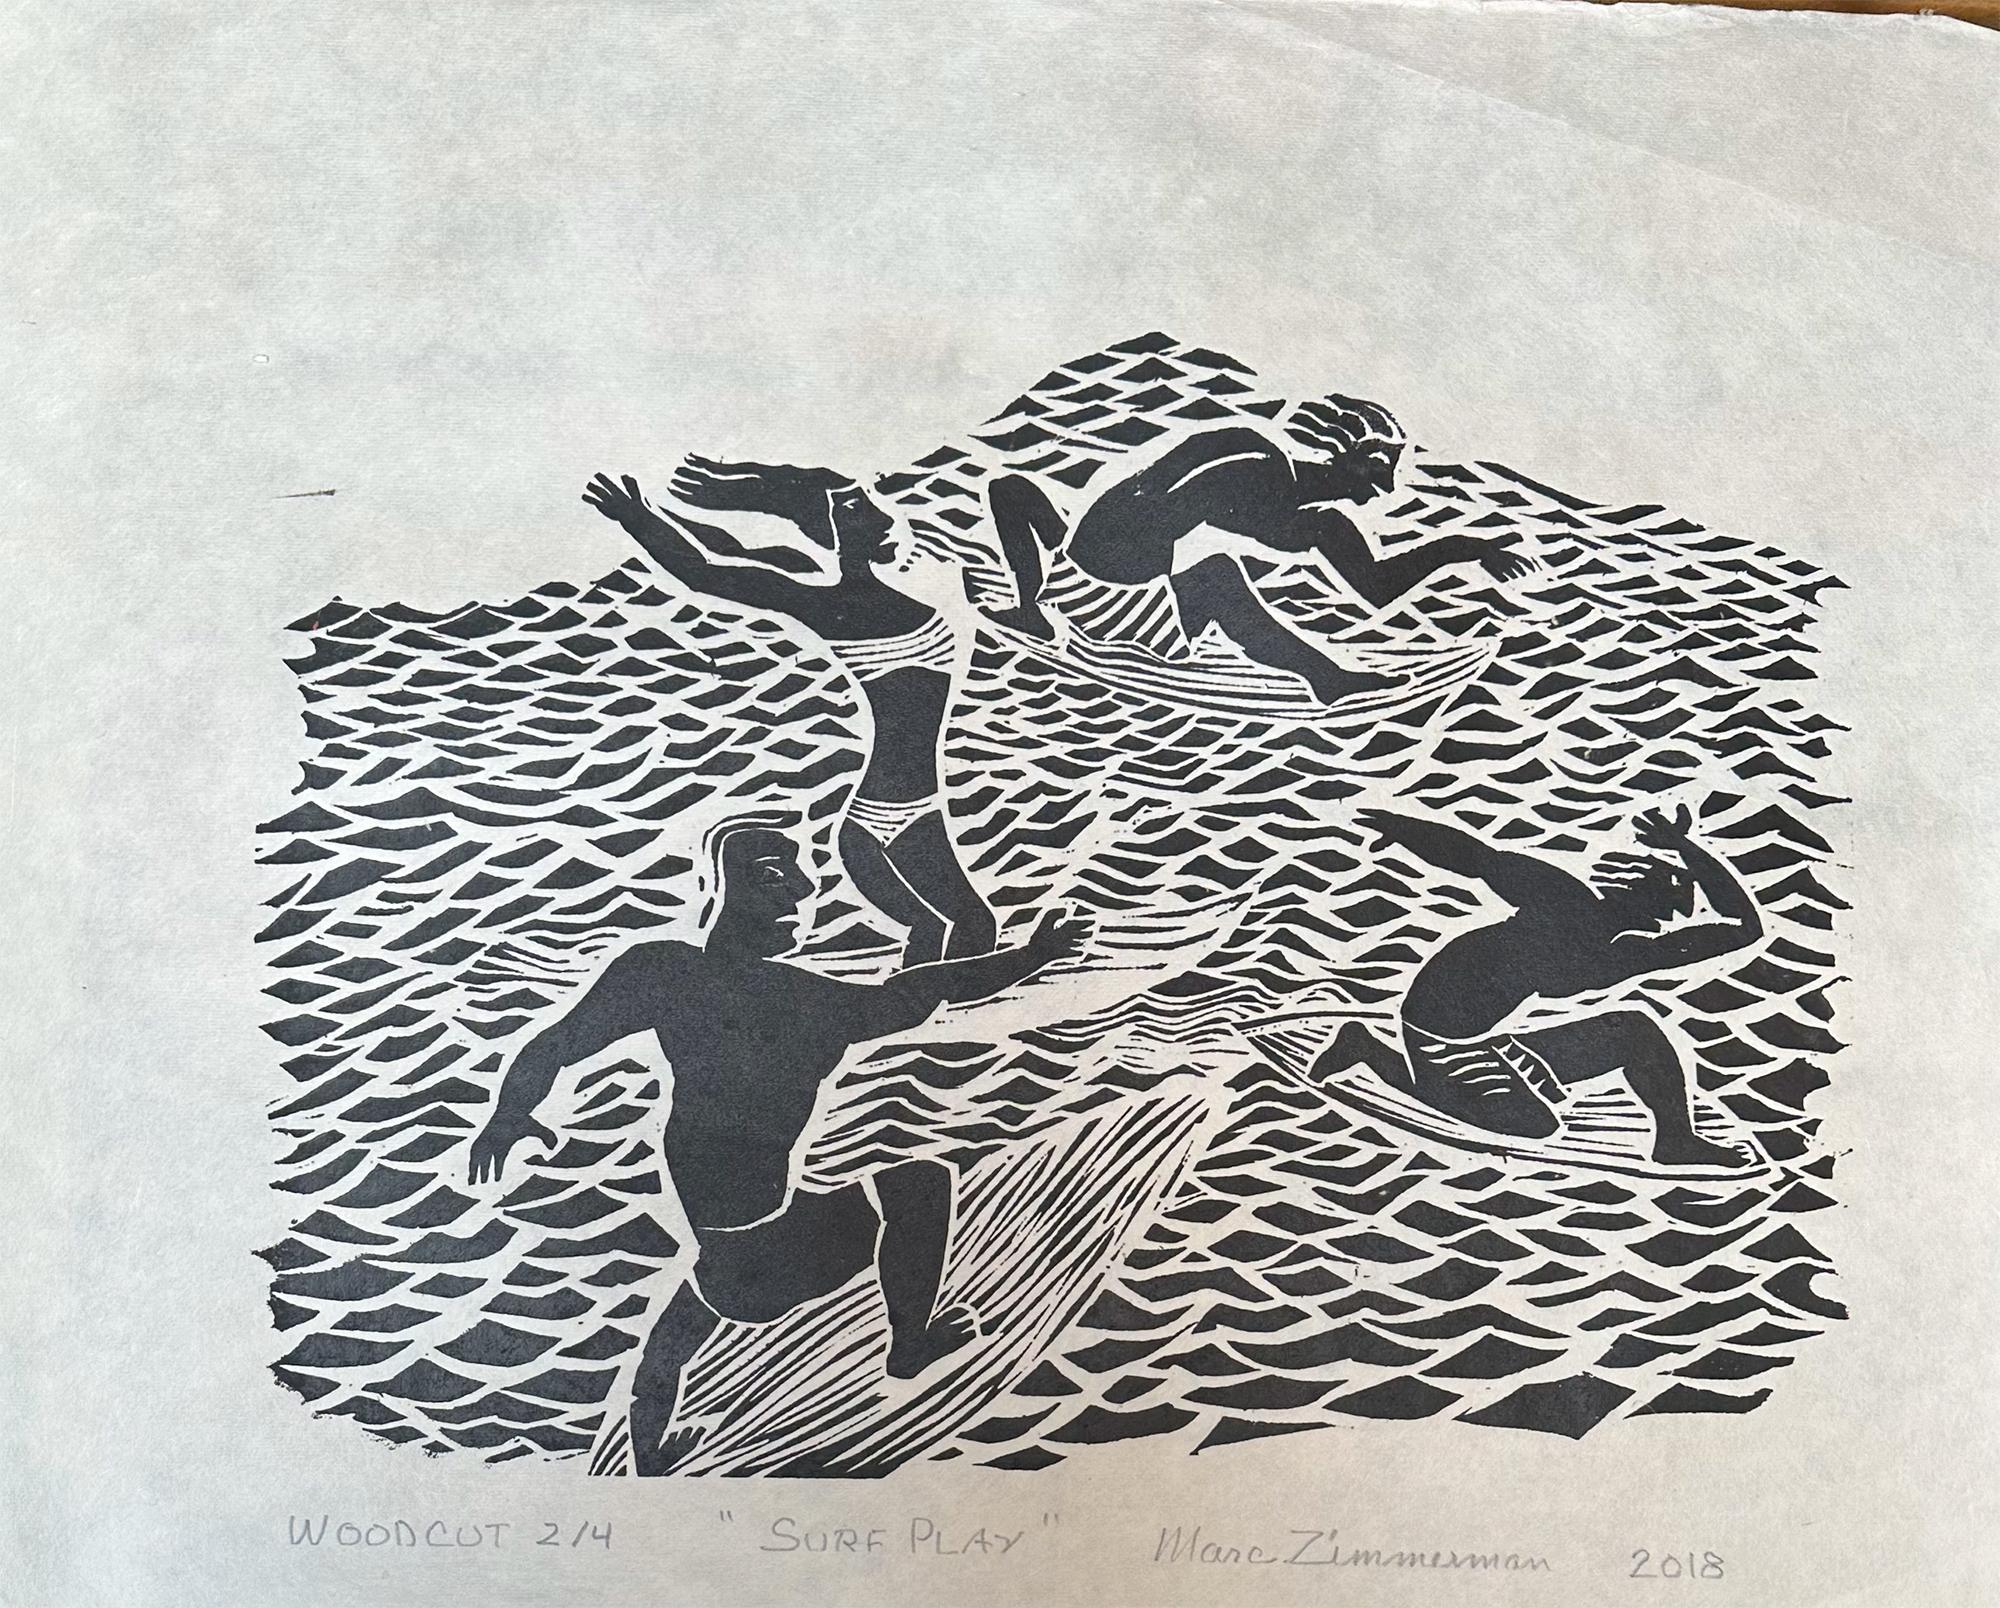 Surf Play- Surfing Art - Figurative - Woodcut Print By Marc Zimmerman

Limited Edition 01/04

This masterwork is exhibited in the Zimmerman Gallery, Carmel CA.

Immerse yourself in the captivating world of surfing and ocean vibes with Marc